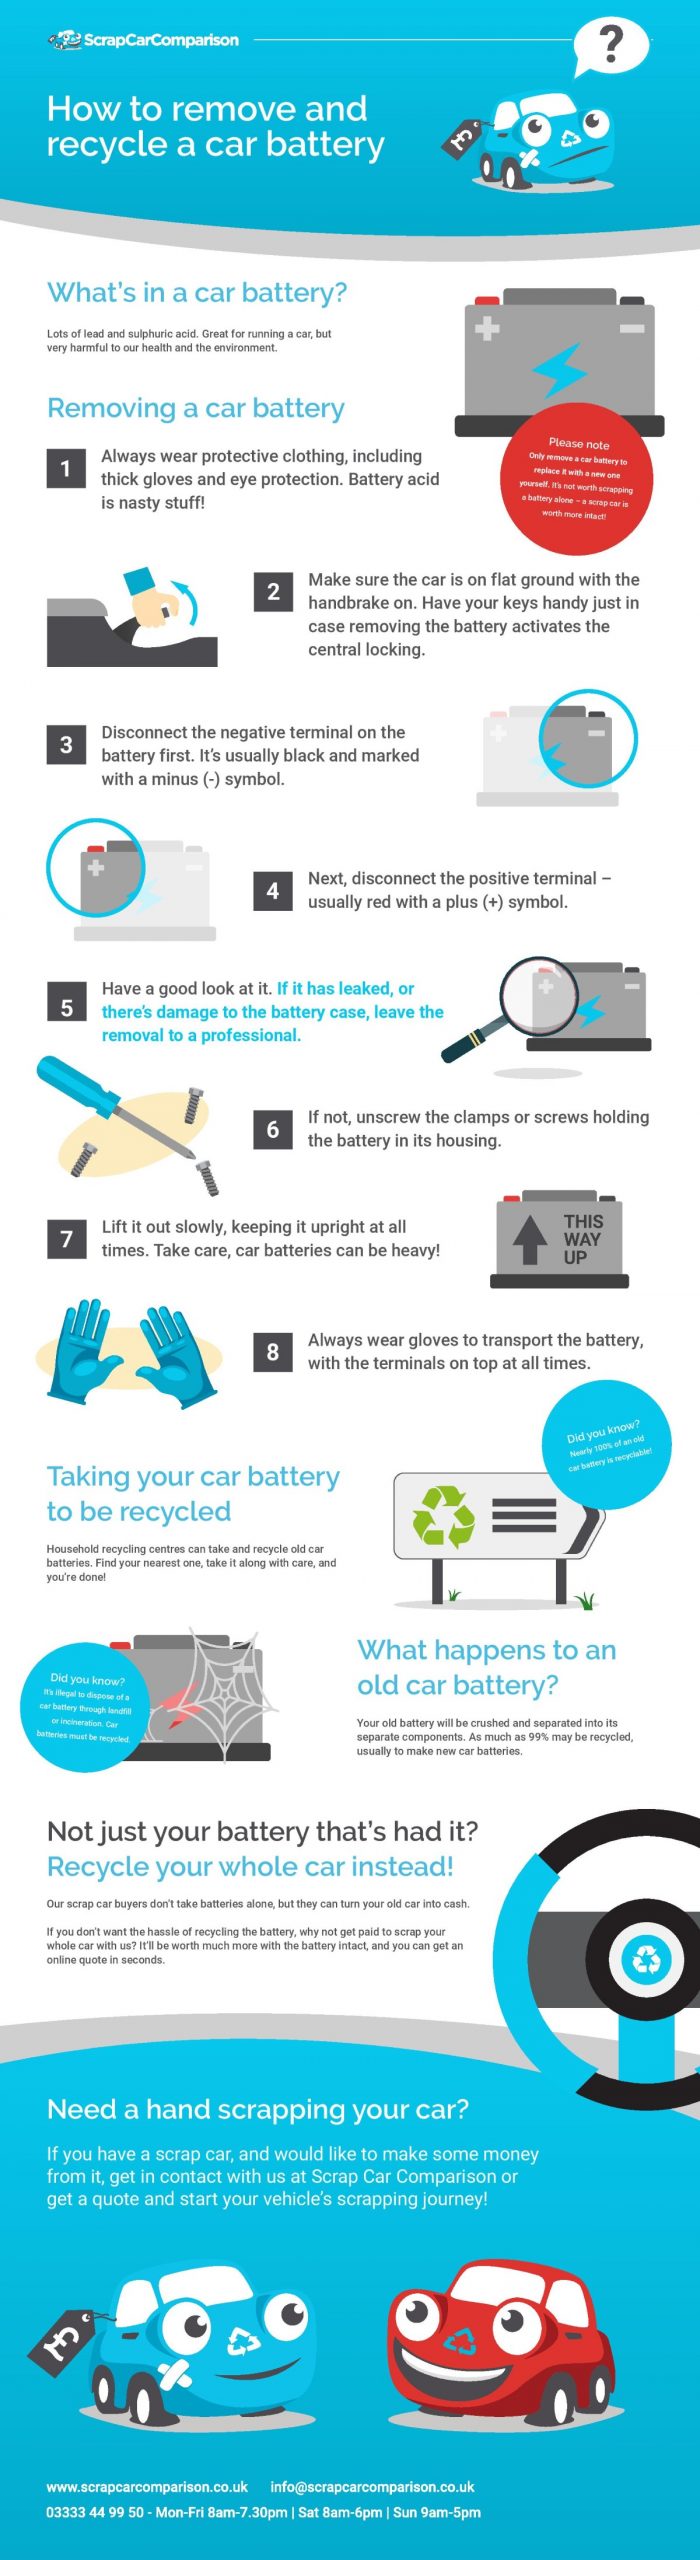 Guide to recycling a car battery